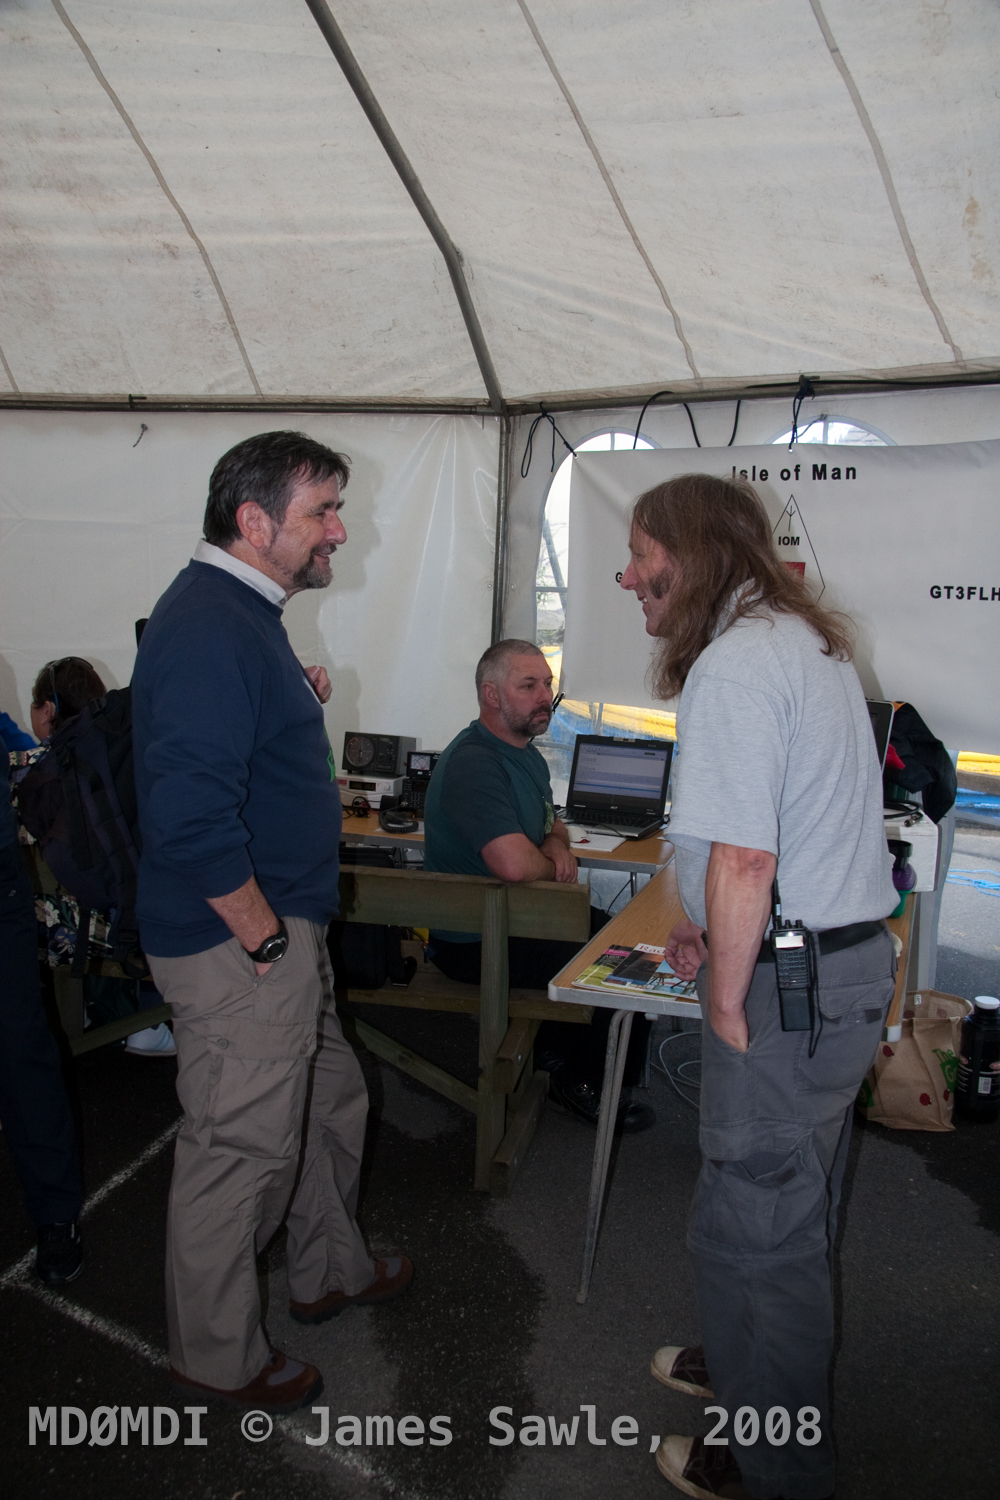 Stuart Hill (GD0OUD) chatting with Rob Hannan (G4RQJ), one of the guys from SOTA (Summits on the Air).